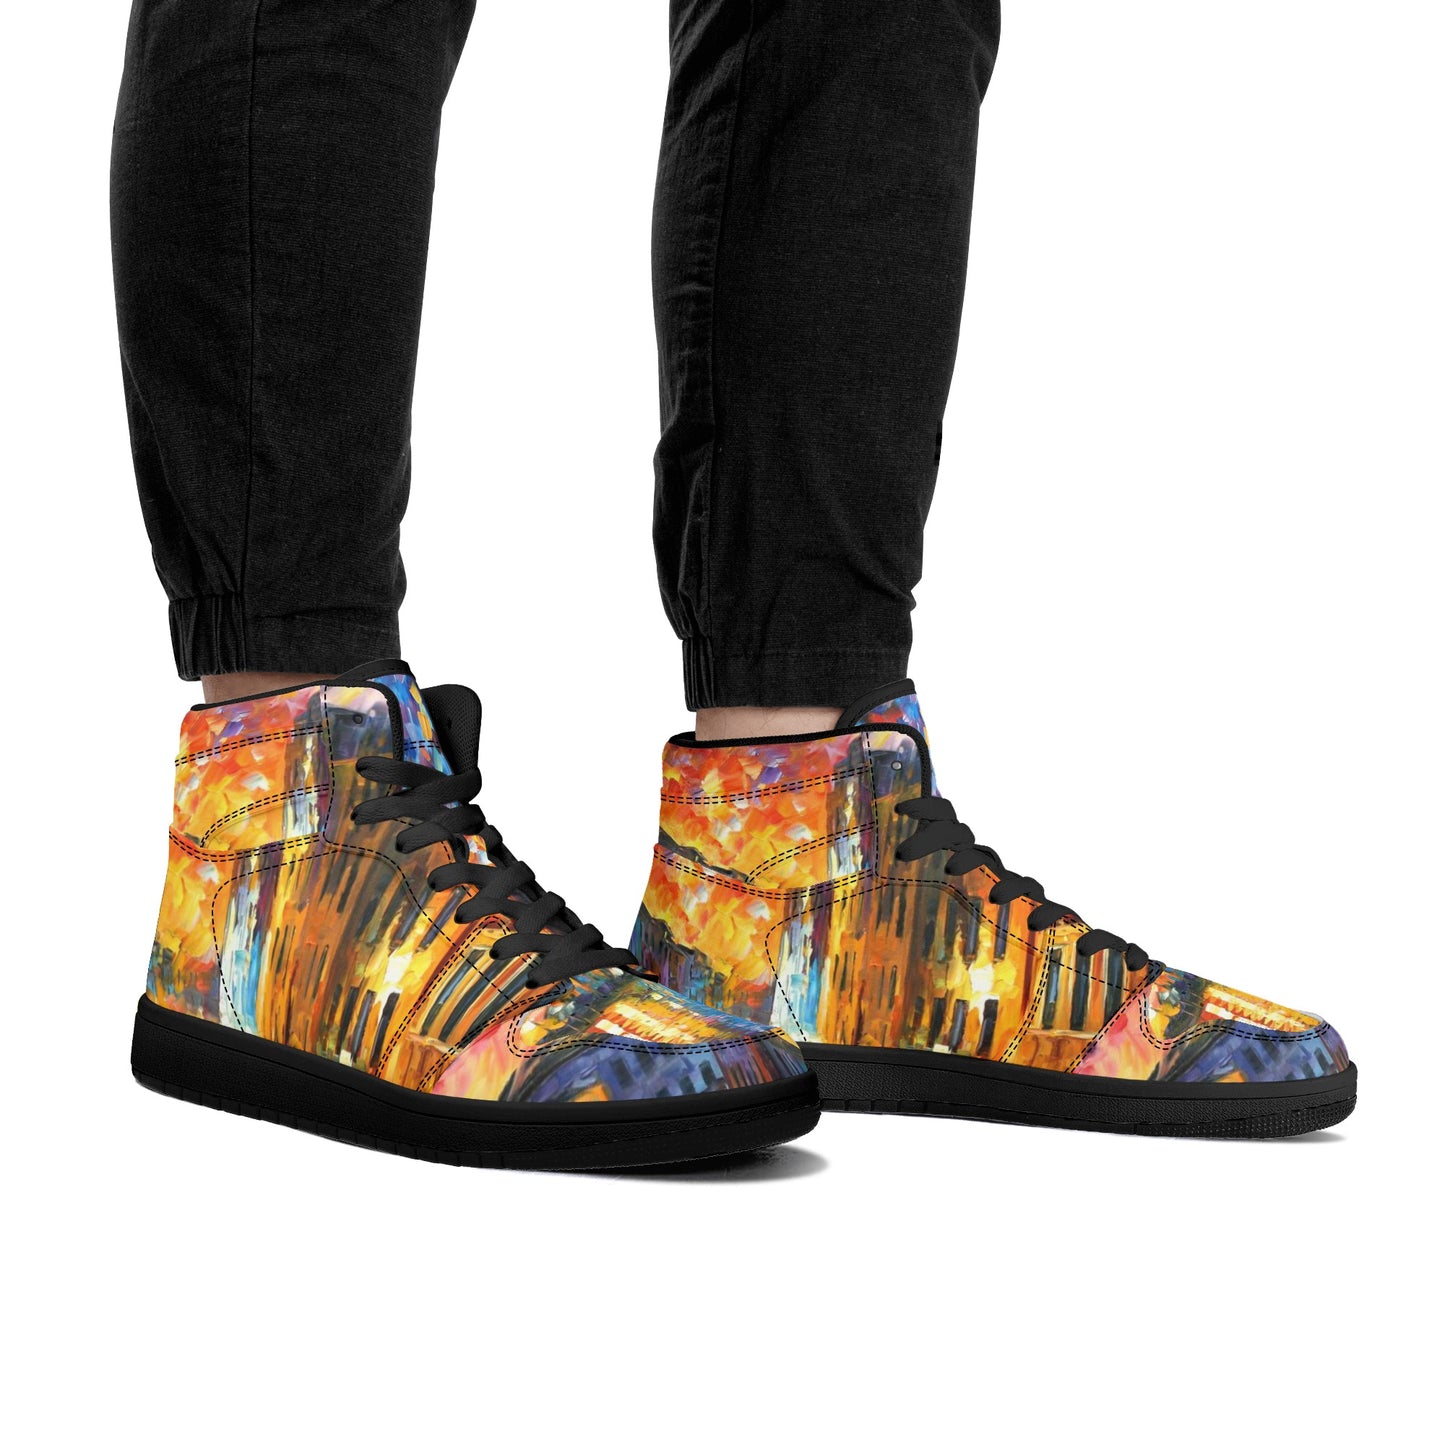 Men's High Top Leather Sneakers Afremov VENICE - GRAND CANAL